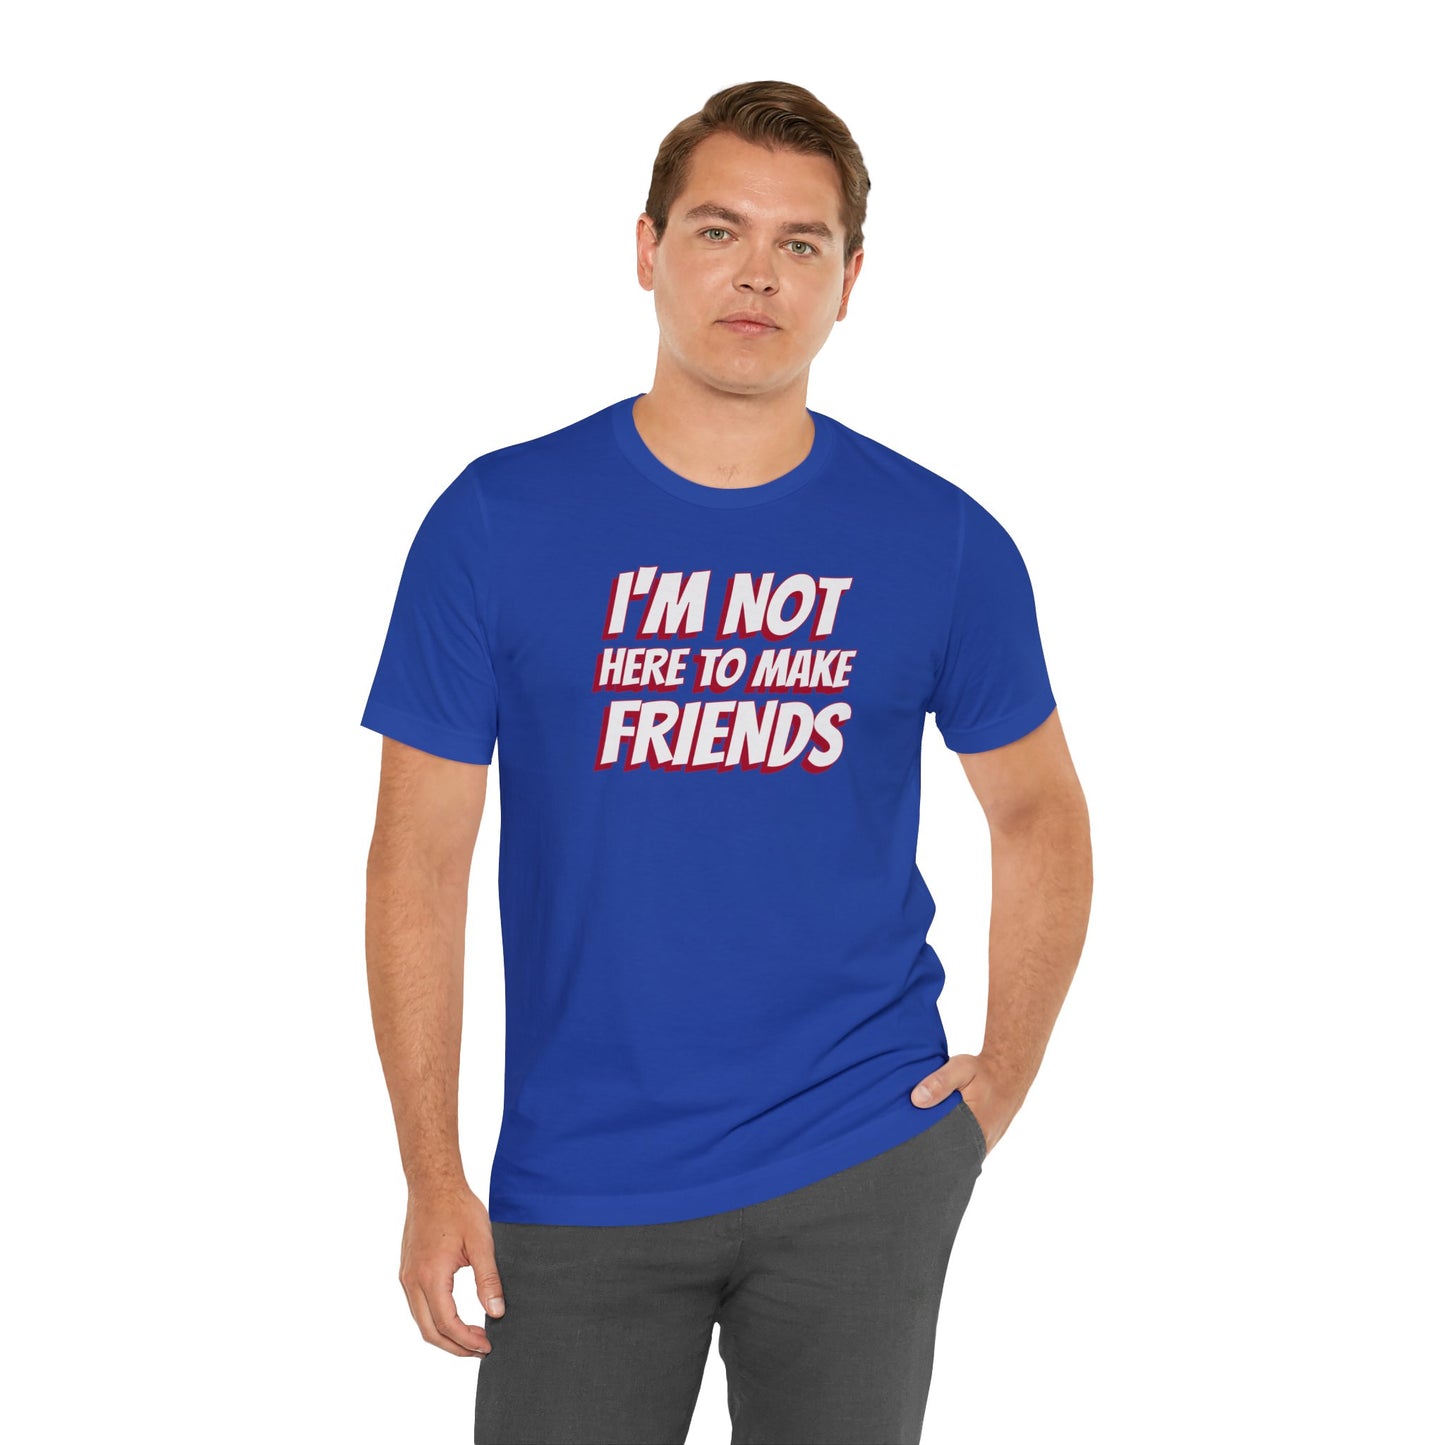 I'm Not Here to Make Friends